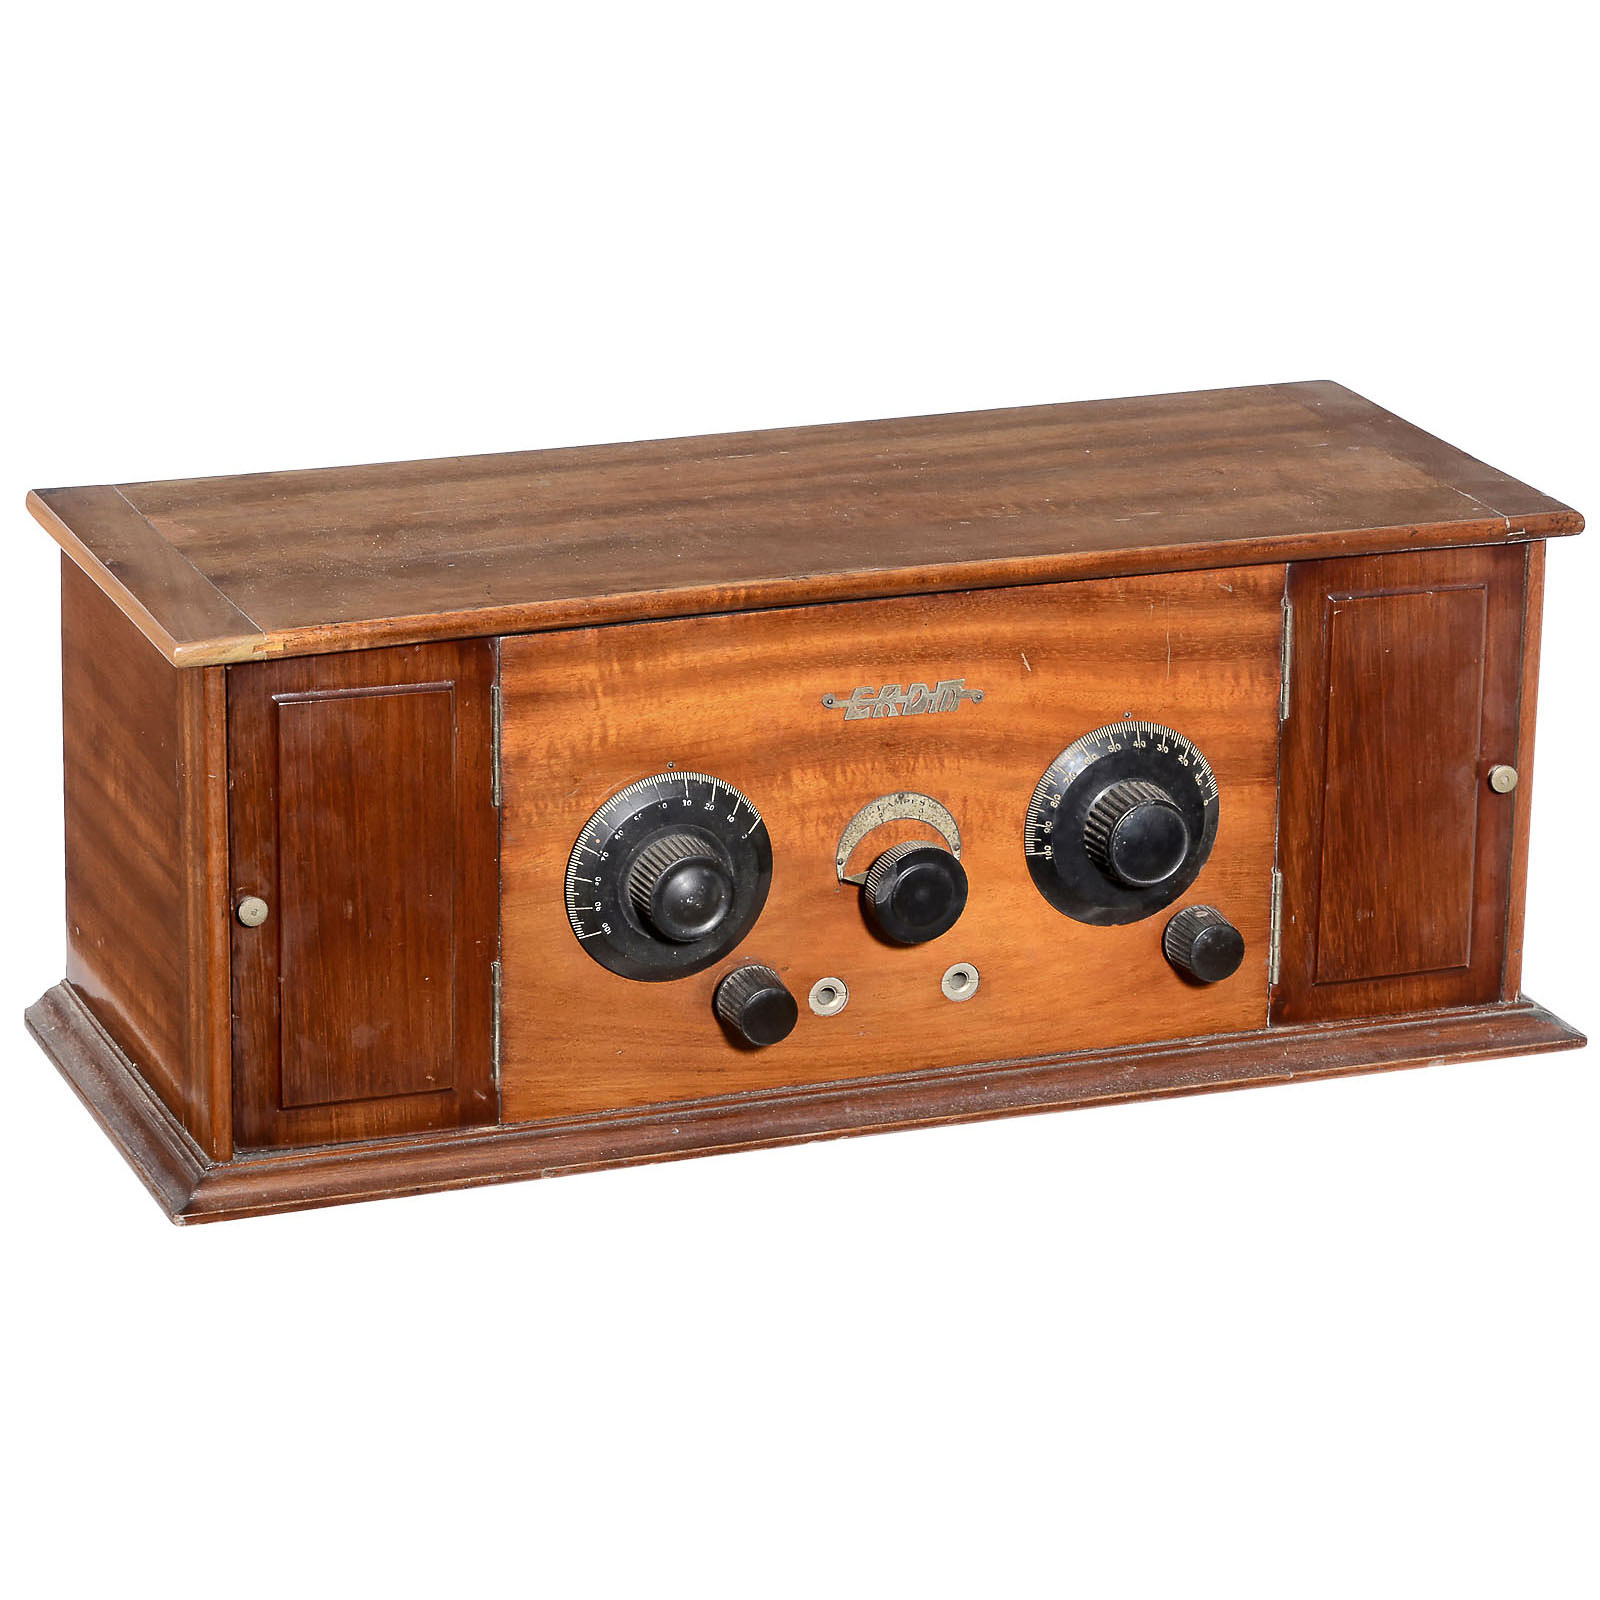 French ERDM Radio, 1924  4-valve battery receiver, MW, wooden case with 2 doors, 2 compartments with